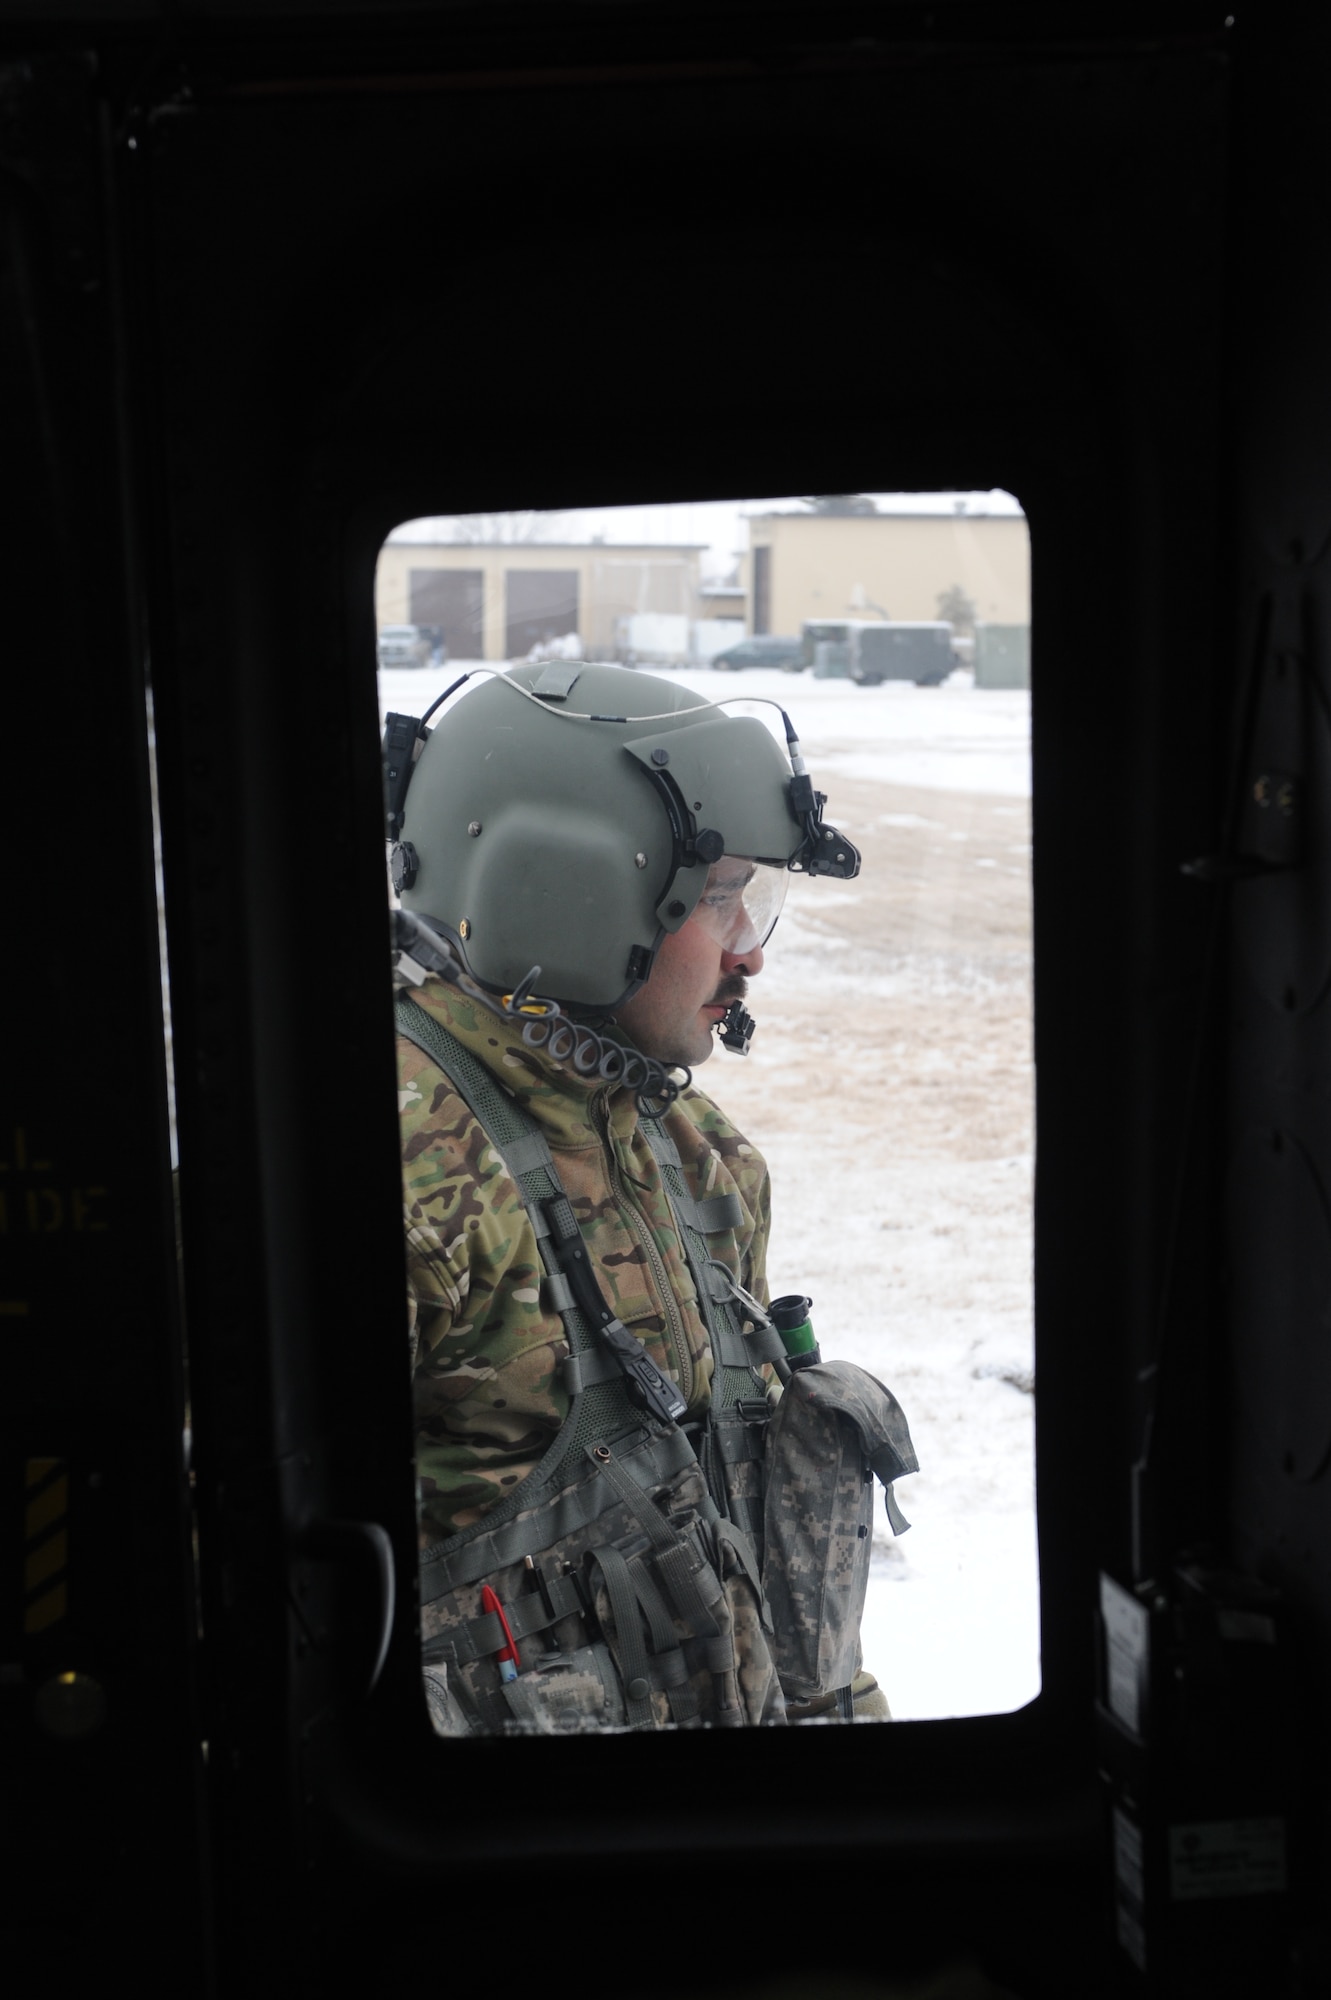 Tech. Sgt. Thomas Liscomb, 54th Helicopter Squadron flight engineer, waits near a UH1-N helicopter before a training mission on Minot Air Force Base, N.D., Feb. 11, 2015. Before the training mission, Liscomb ensured everything from the propellers to the engines were flight-ready. (U.S. Air Force photos/Senior Airman Stephanie Morris)